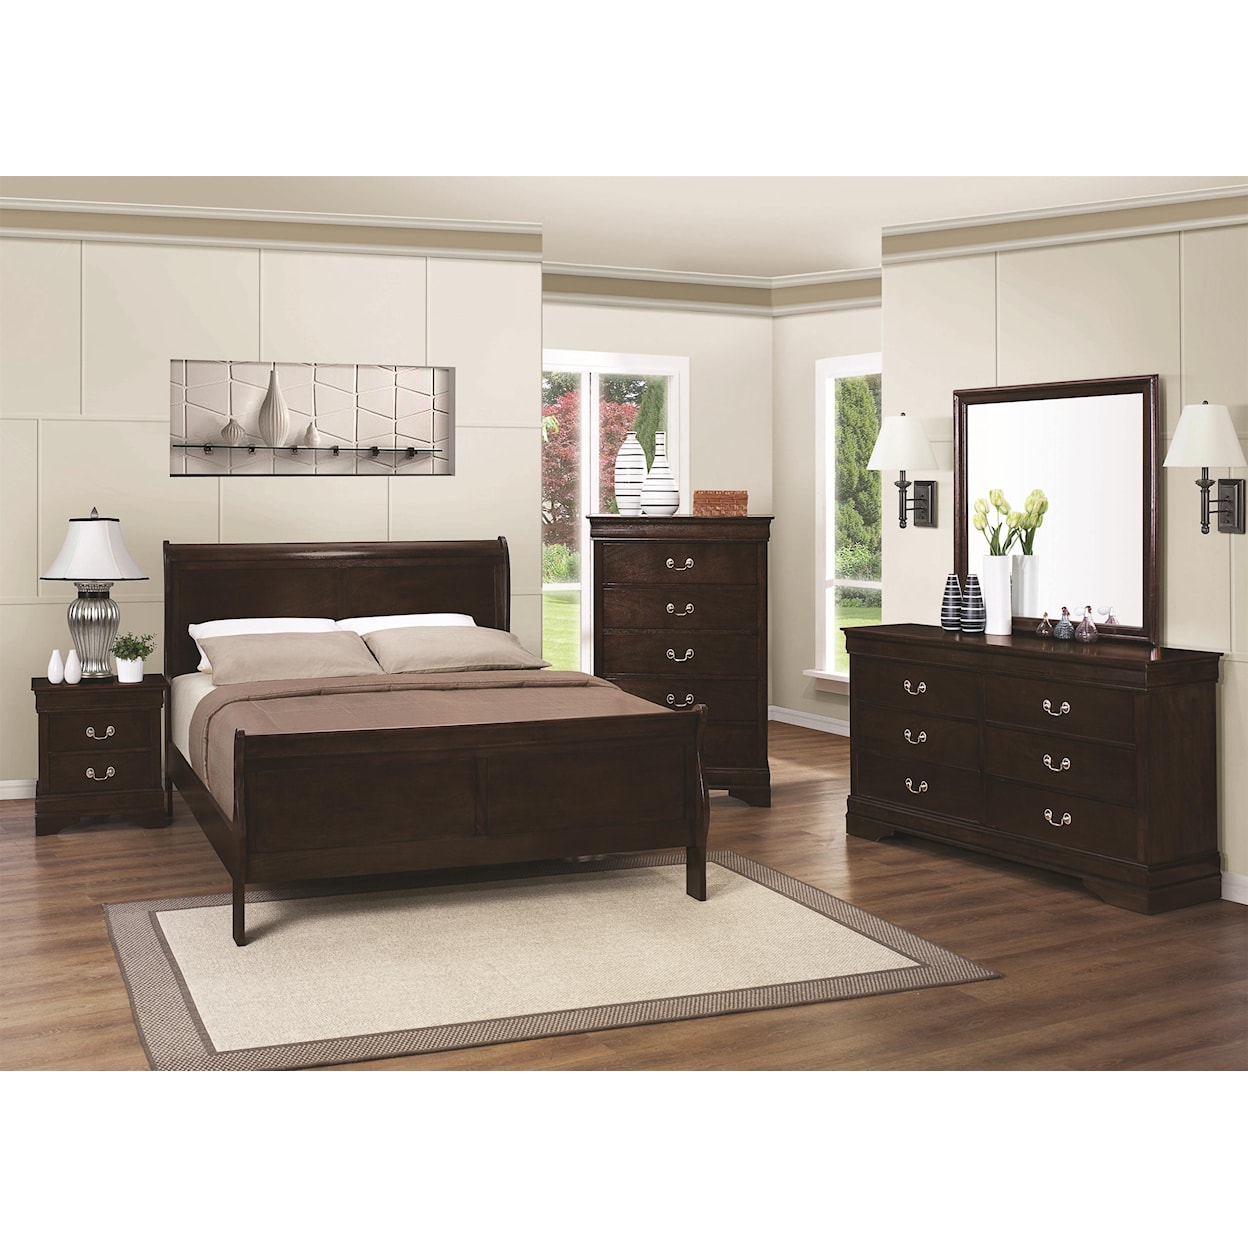 Coaster Louis Philippe 202 7pc Full Bedroom Group